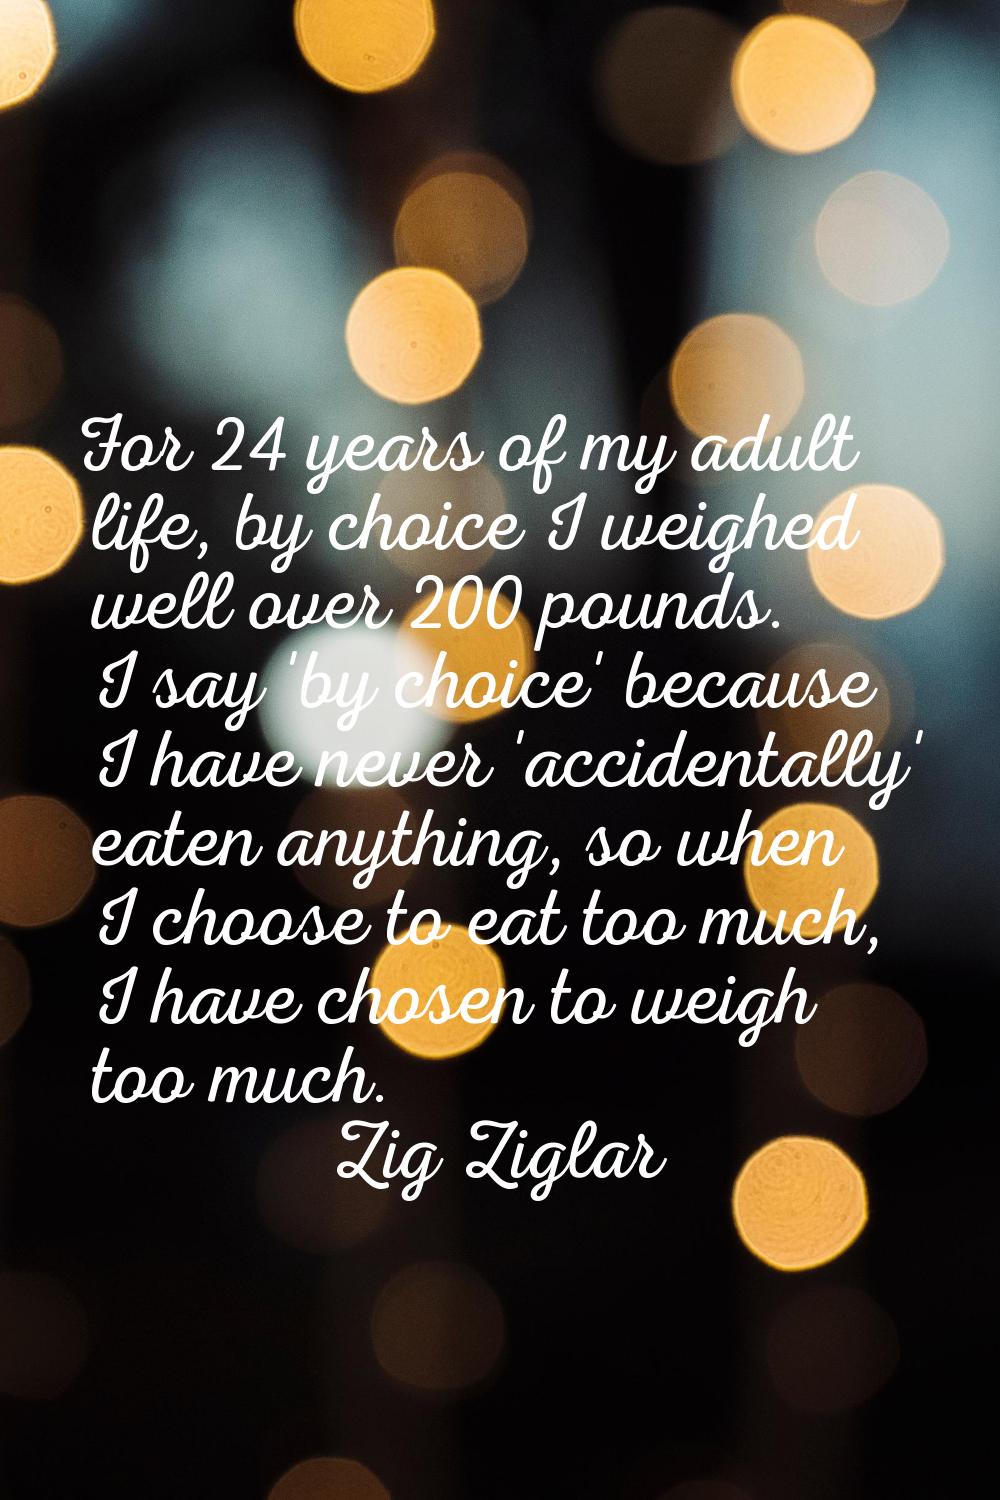 For 24 years of my adult life, by choice I weighed well over 200 pounds. I say 'by choice' because 